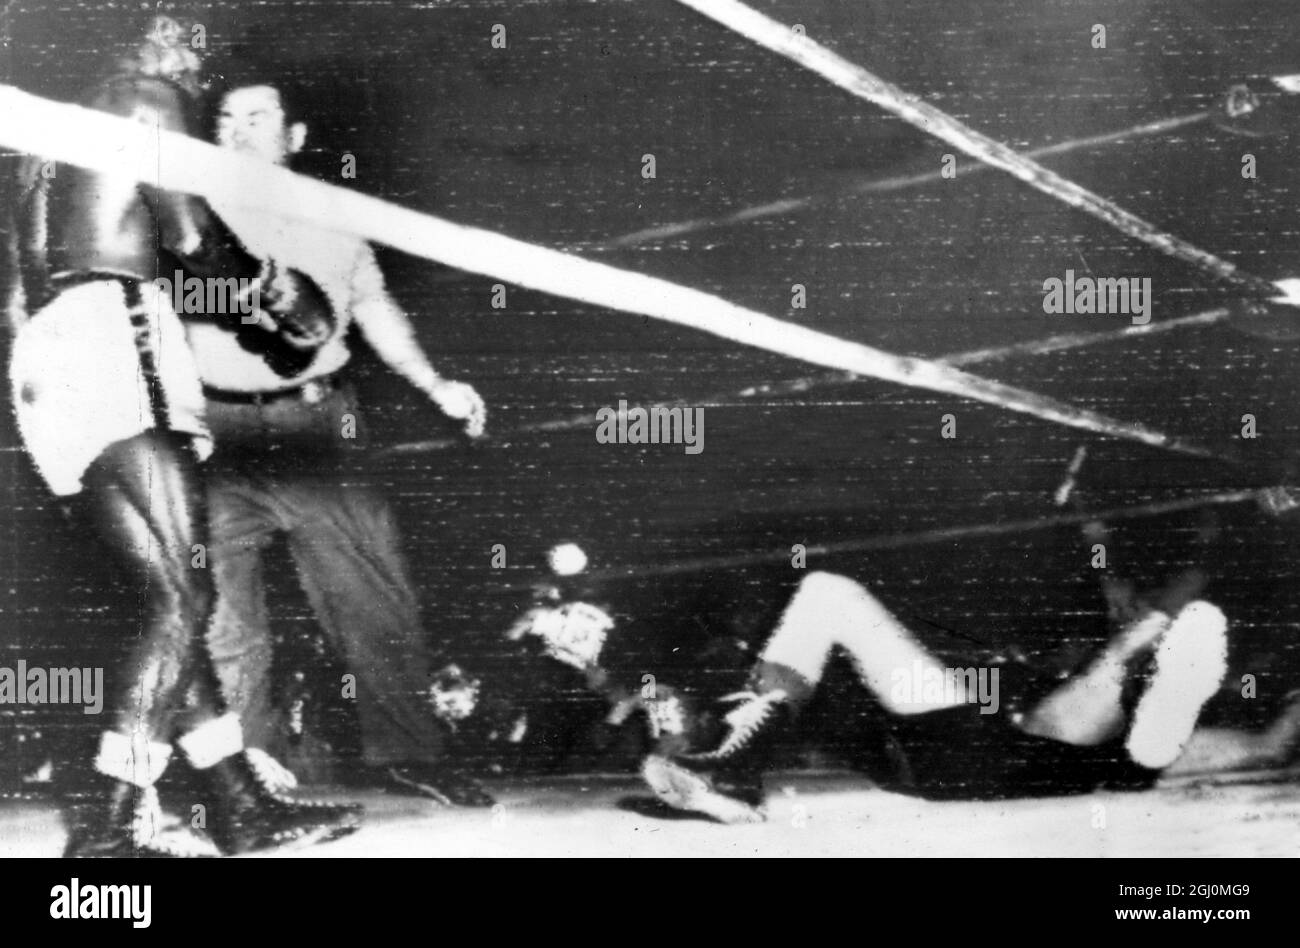 Wrigley Field , Los Angeles . Hogan ' Kid ' Bassey of Nigeria the World Featherweight Champion is restrained by referee after the former had floored Ricardo ' Little Bird ' of Liverpool in the third round . The count ended with only seconds of the round to go . 2 April 1958 Stock Photo